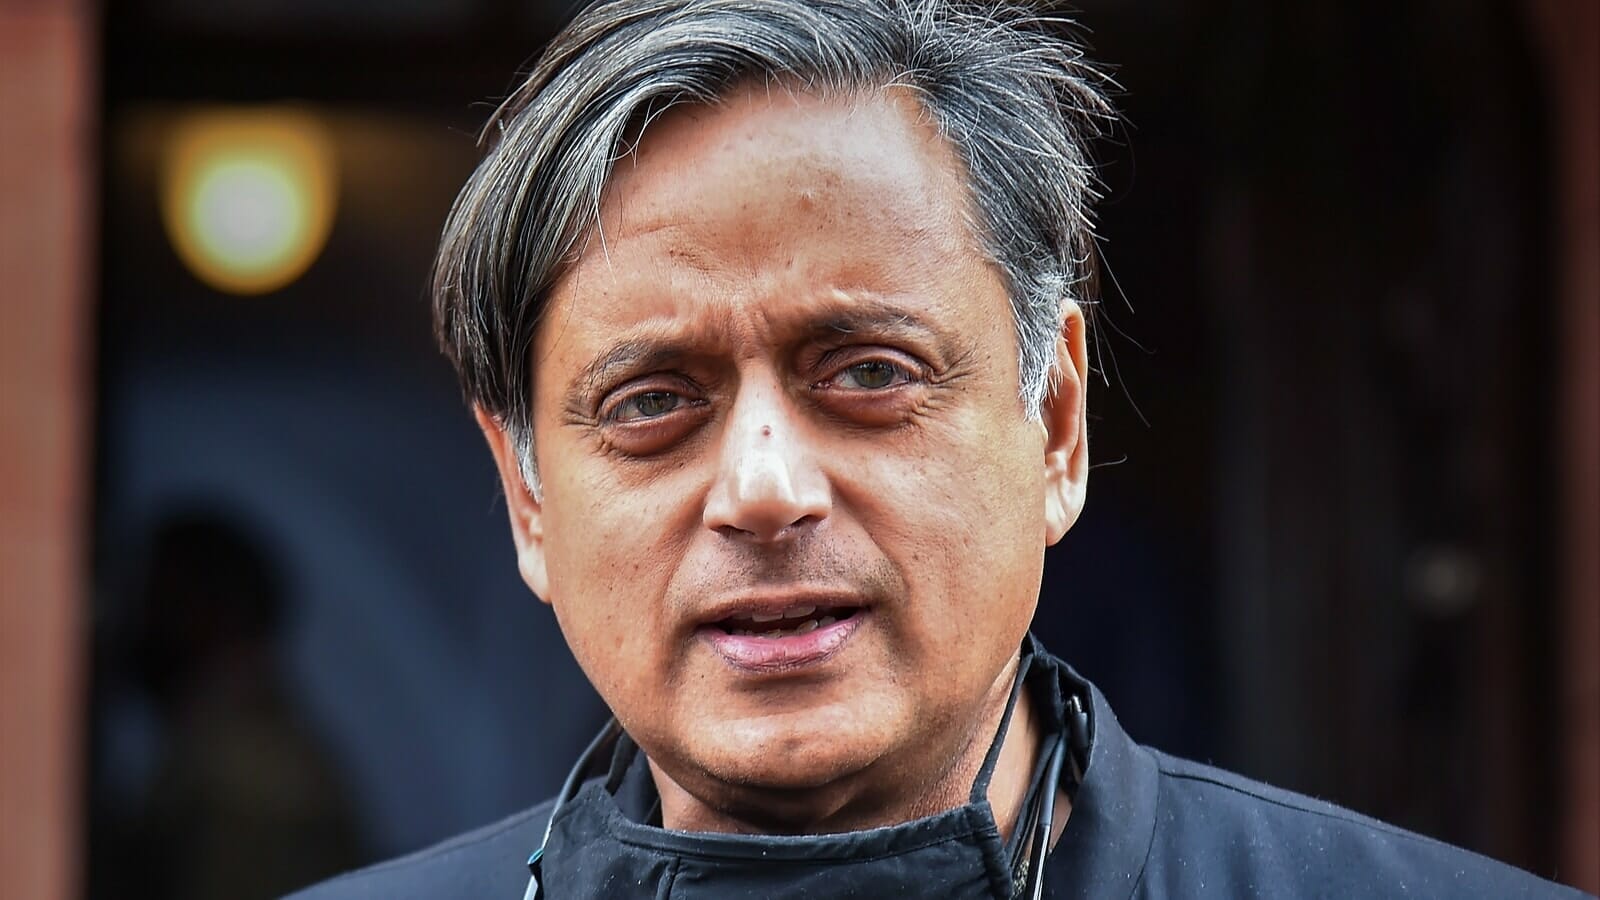 Sun aligns with temple window during autumnal equinox, Shashi Tharoor shares pic